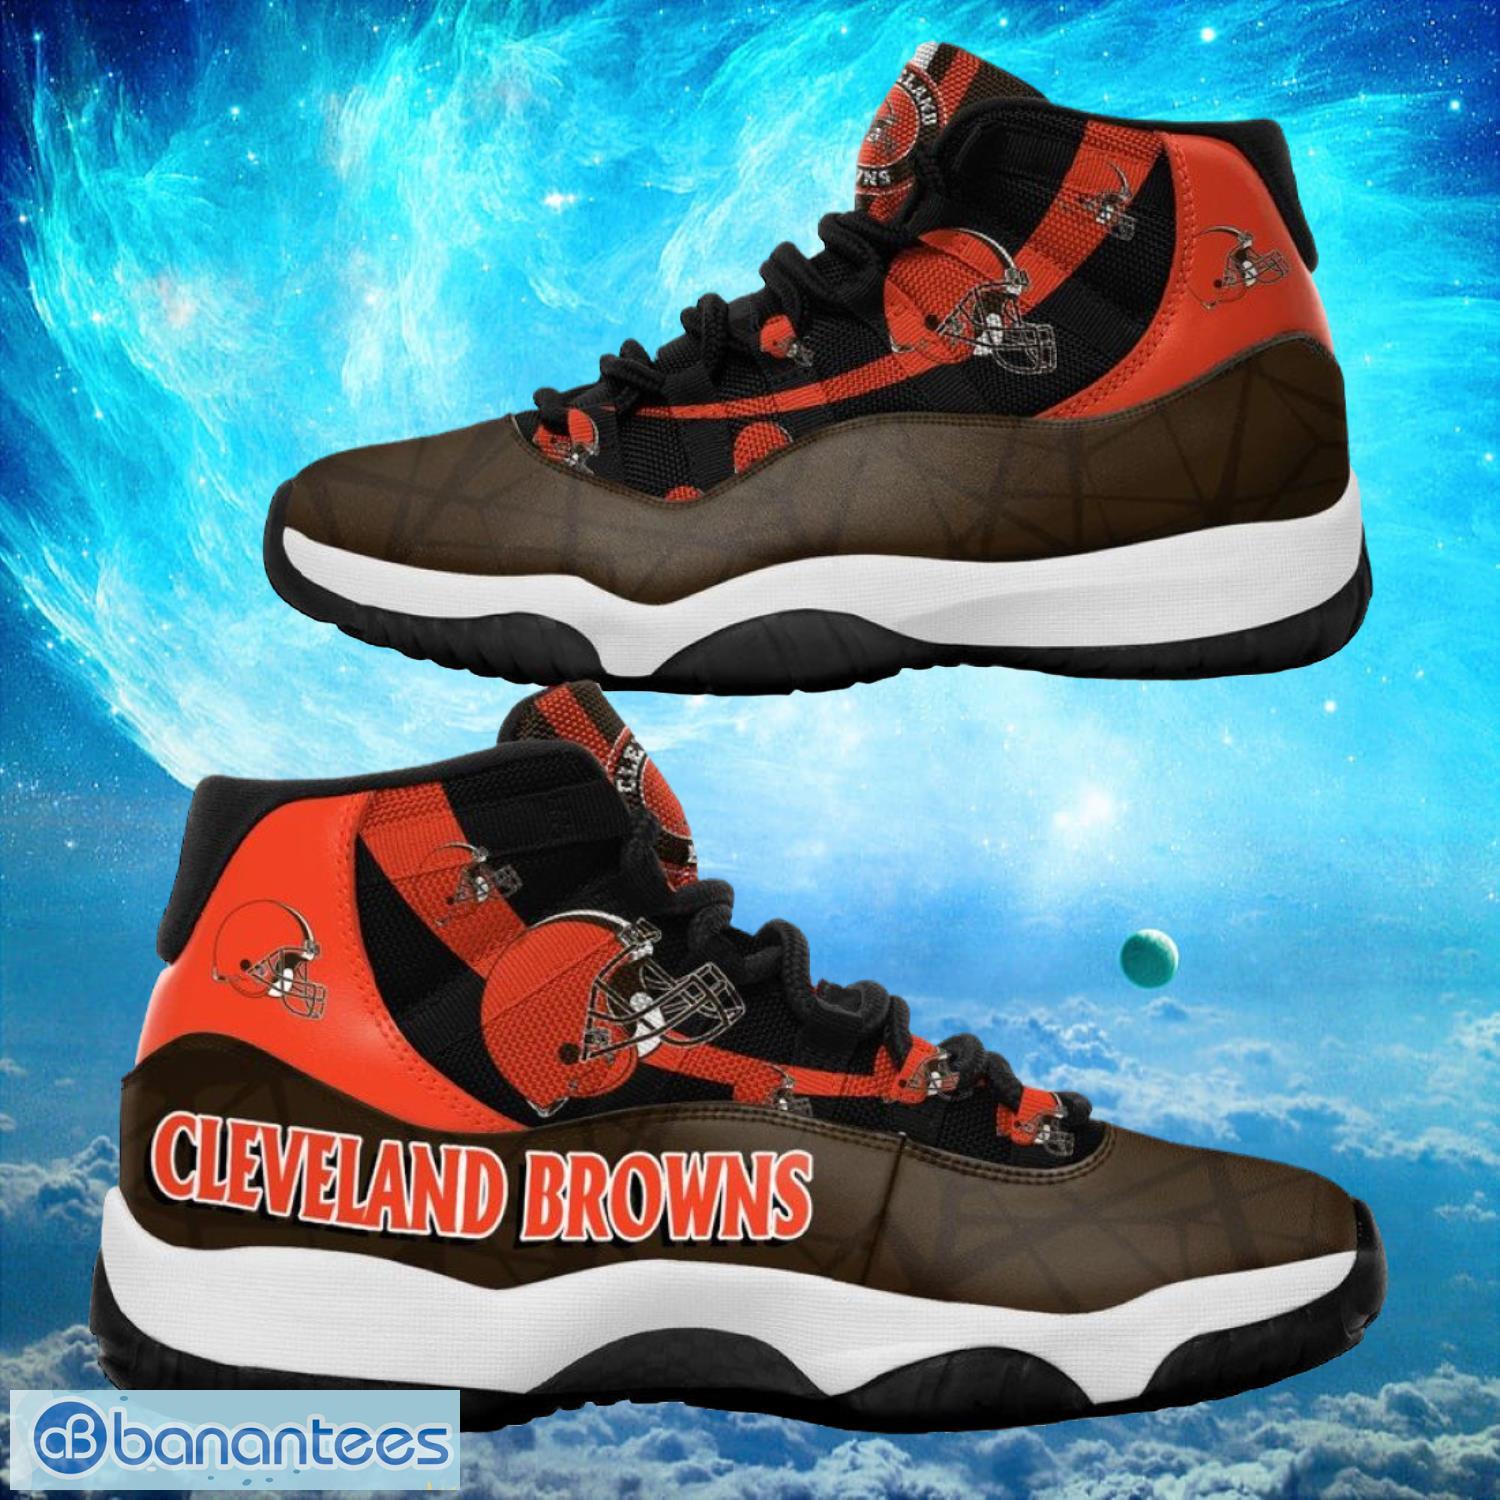 Cleveland Browns NFL Air Jordan 11 Sneakers Shoes Gift For Fans Product Photo 1